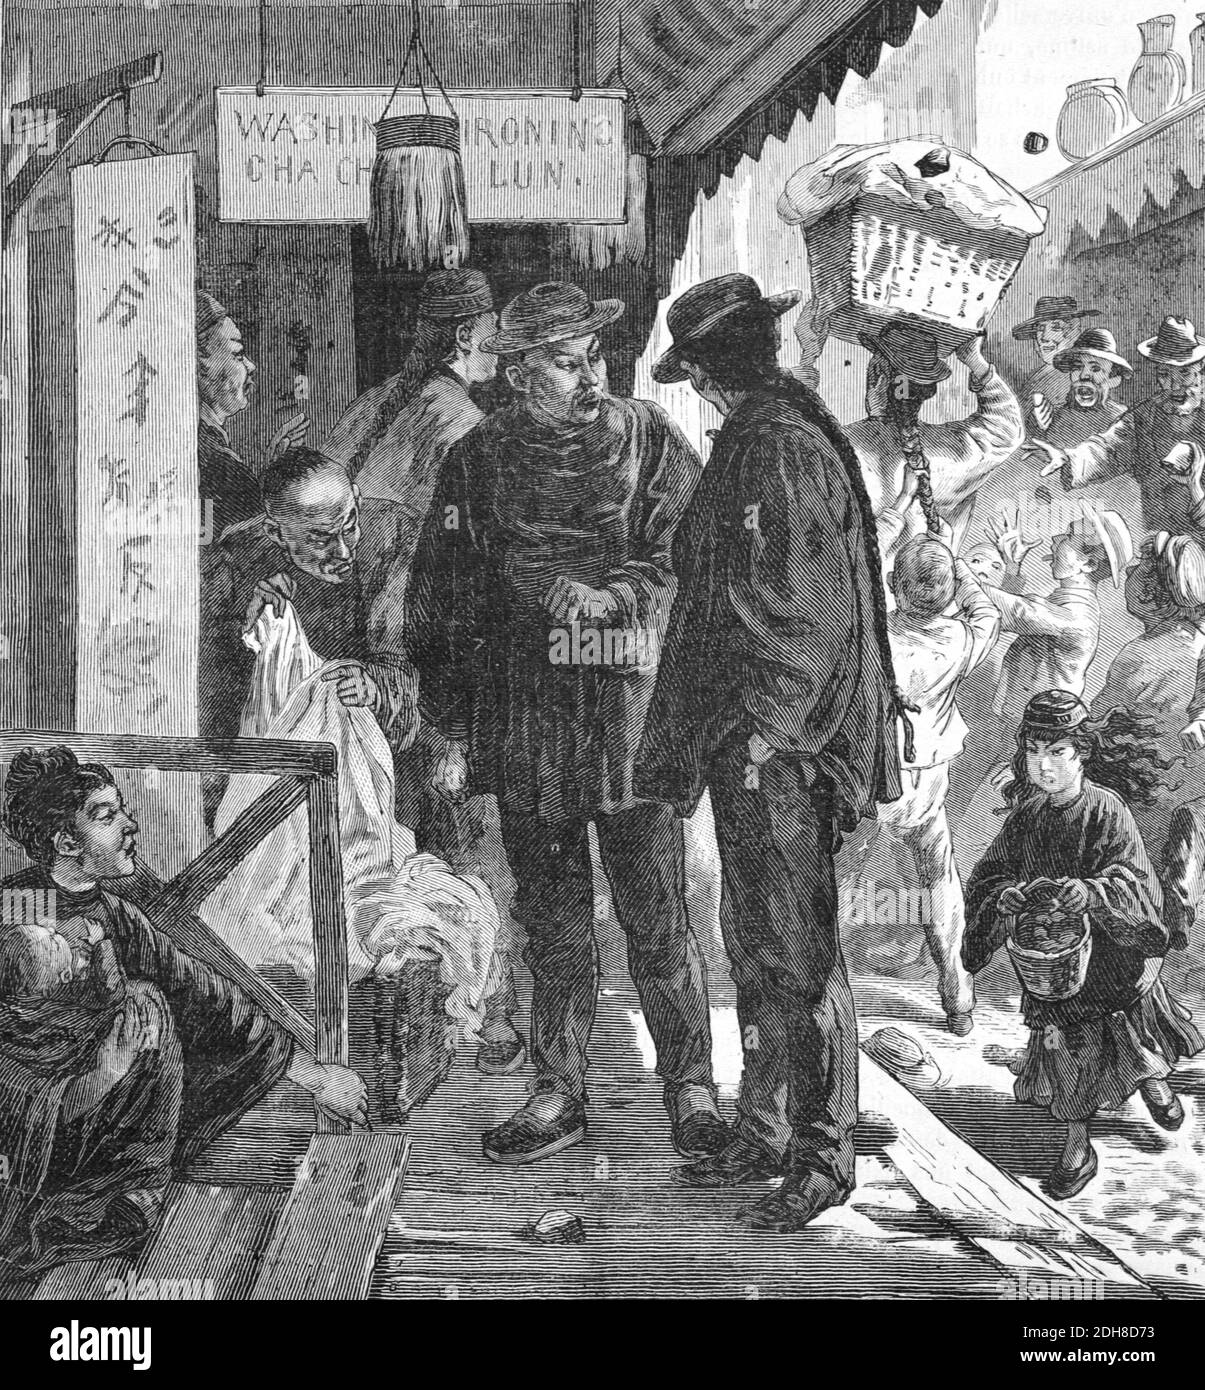 Chinese Settlers or Immigrants in Chinatown San Francisco USA (Eng 1880) Vintage Illustration or Engraving Stock Photo